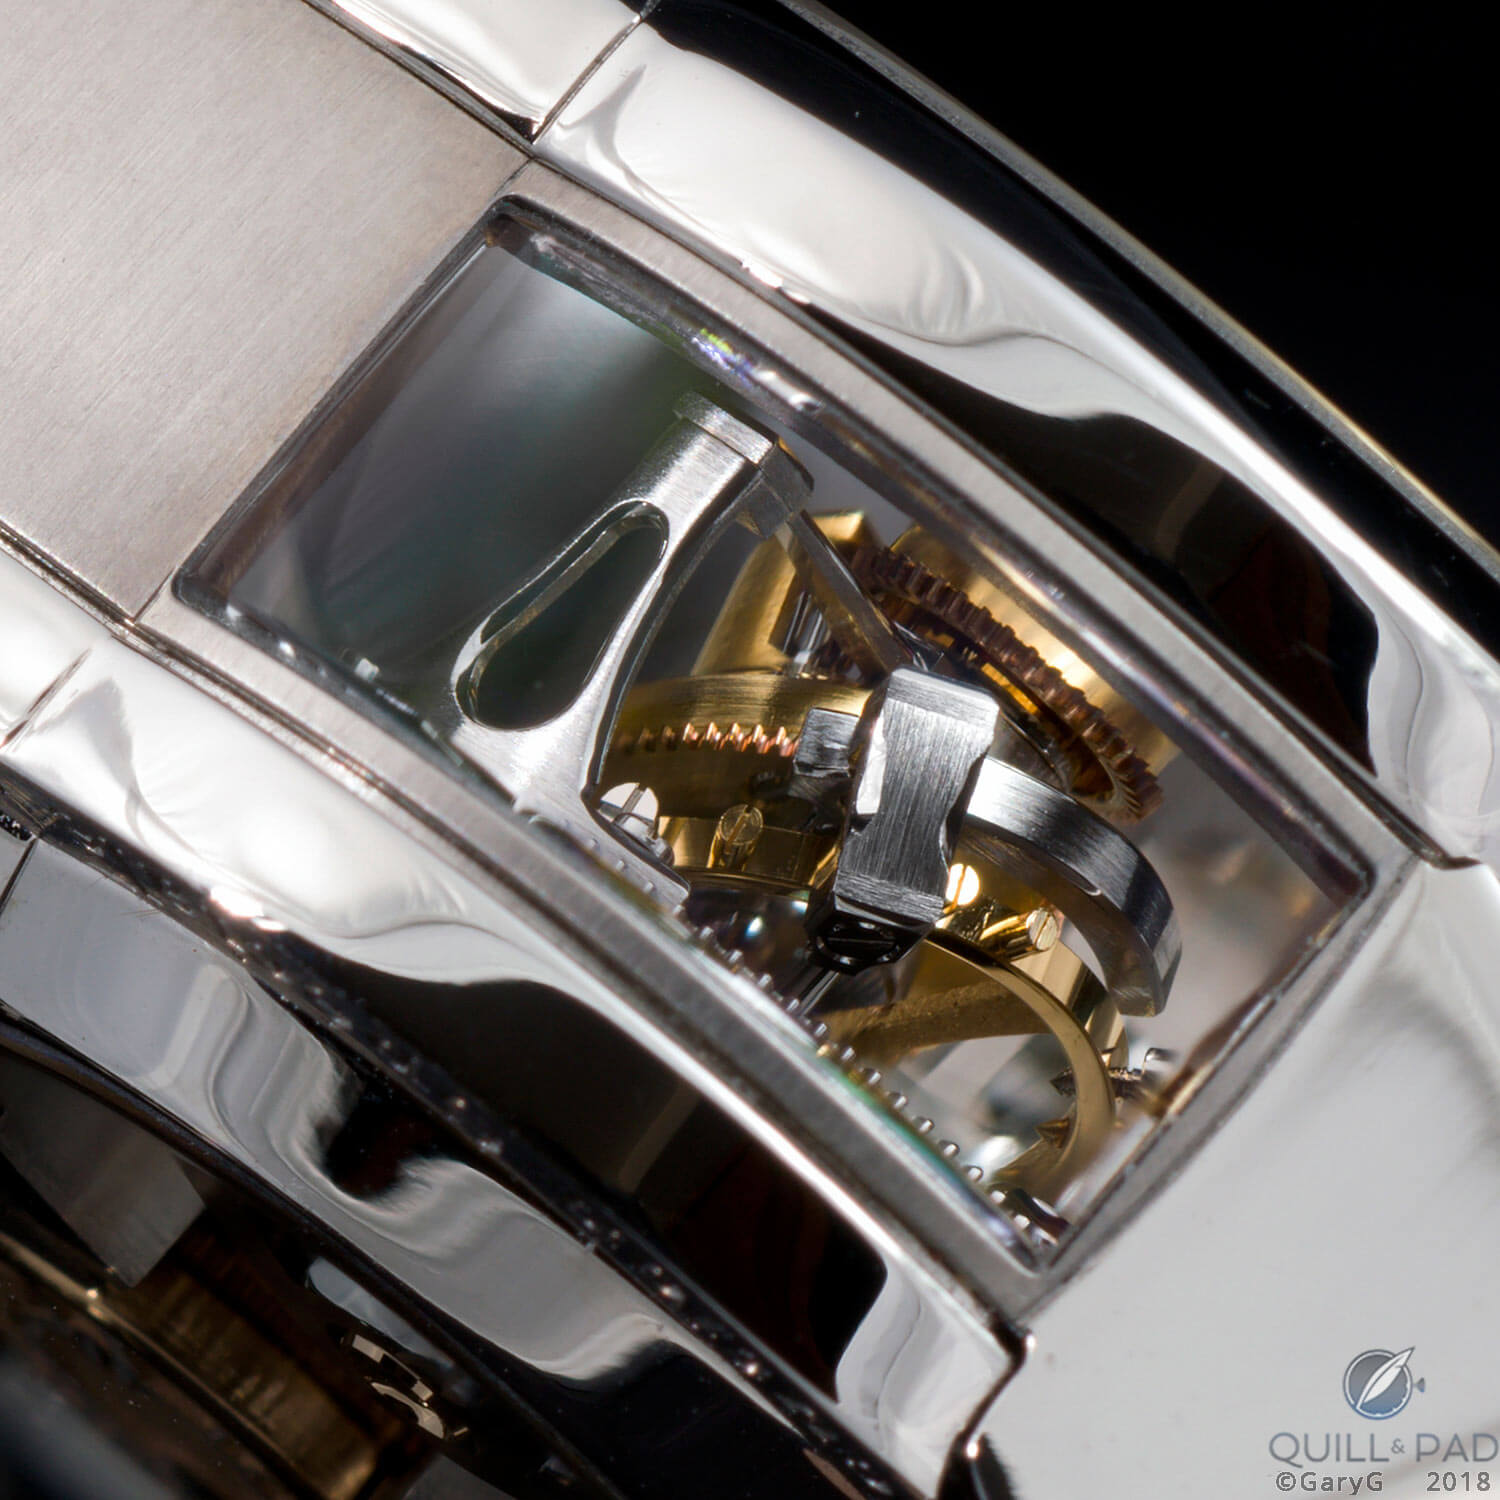 Secret window: double tourbillon assembly seen through the side of the Invention Piece 2’s case